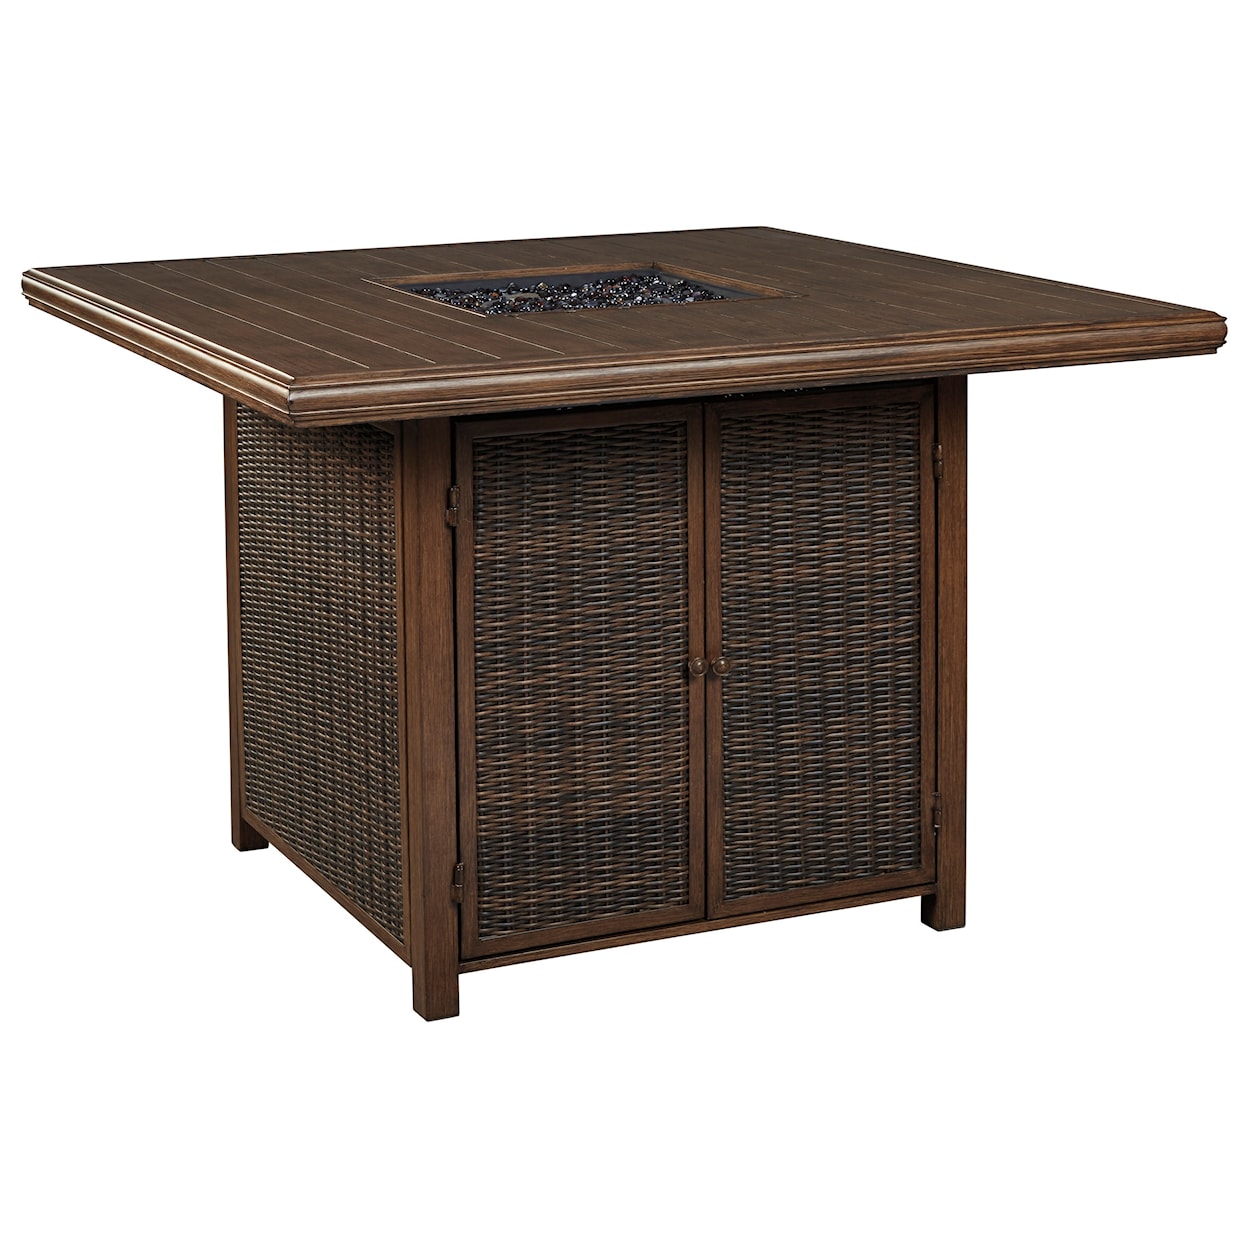 Signature Paradise Trail Square Bar Table with Fire Pit